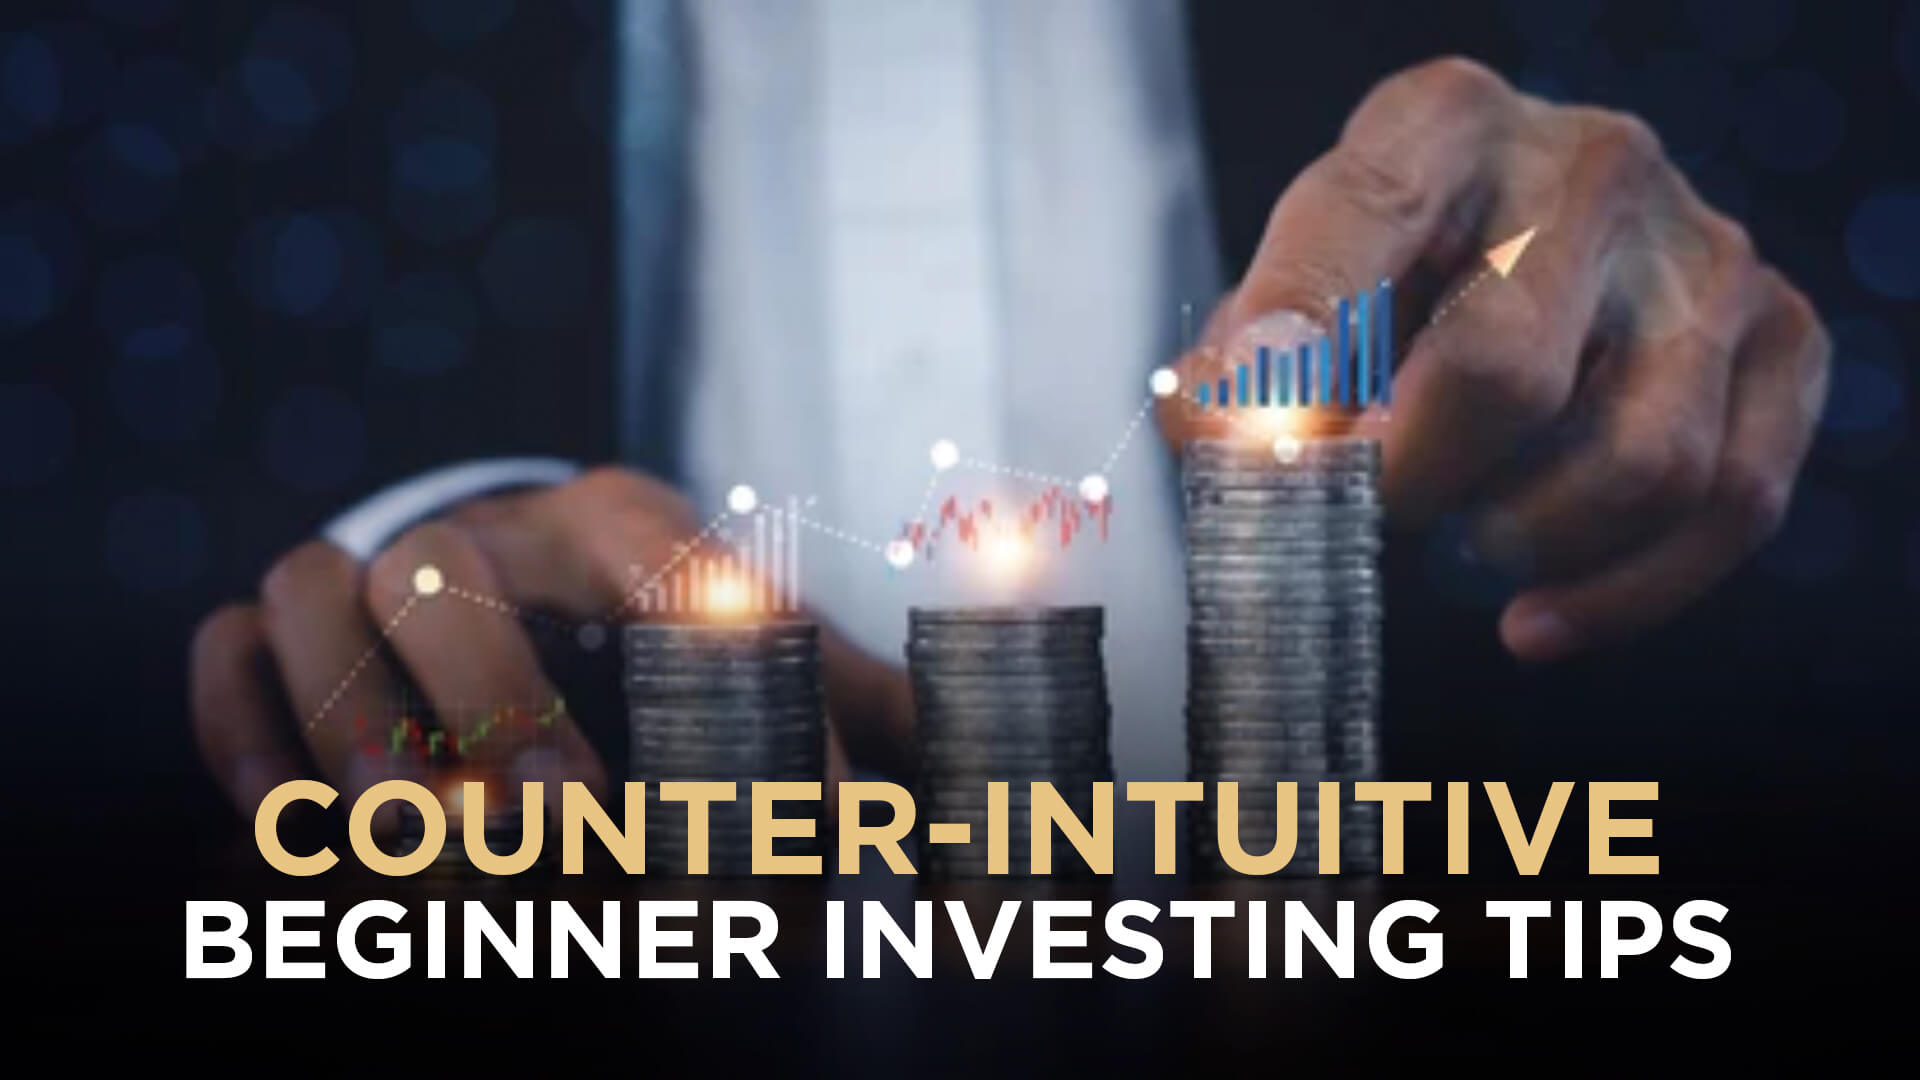 Counter-intuitive beginner investing tips